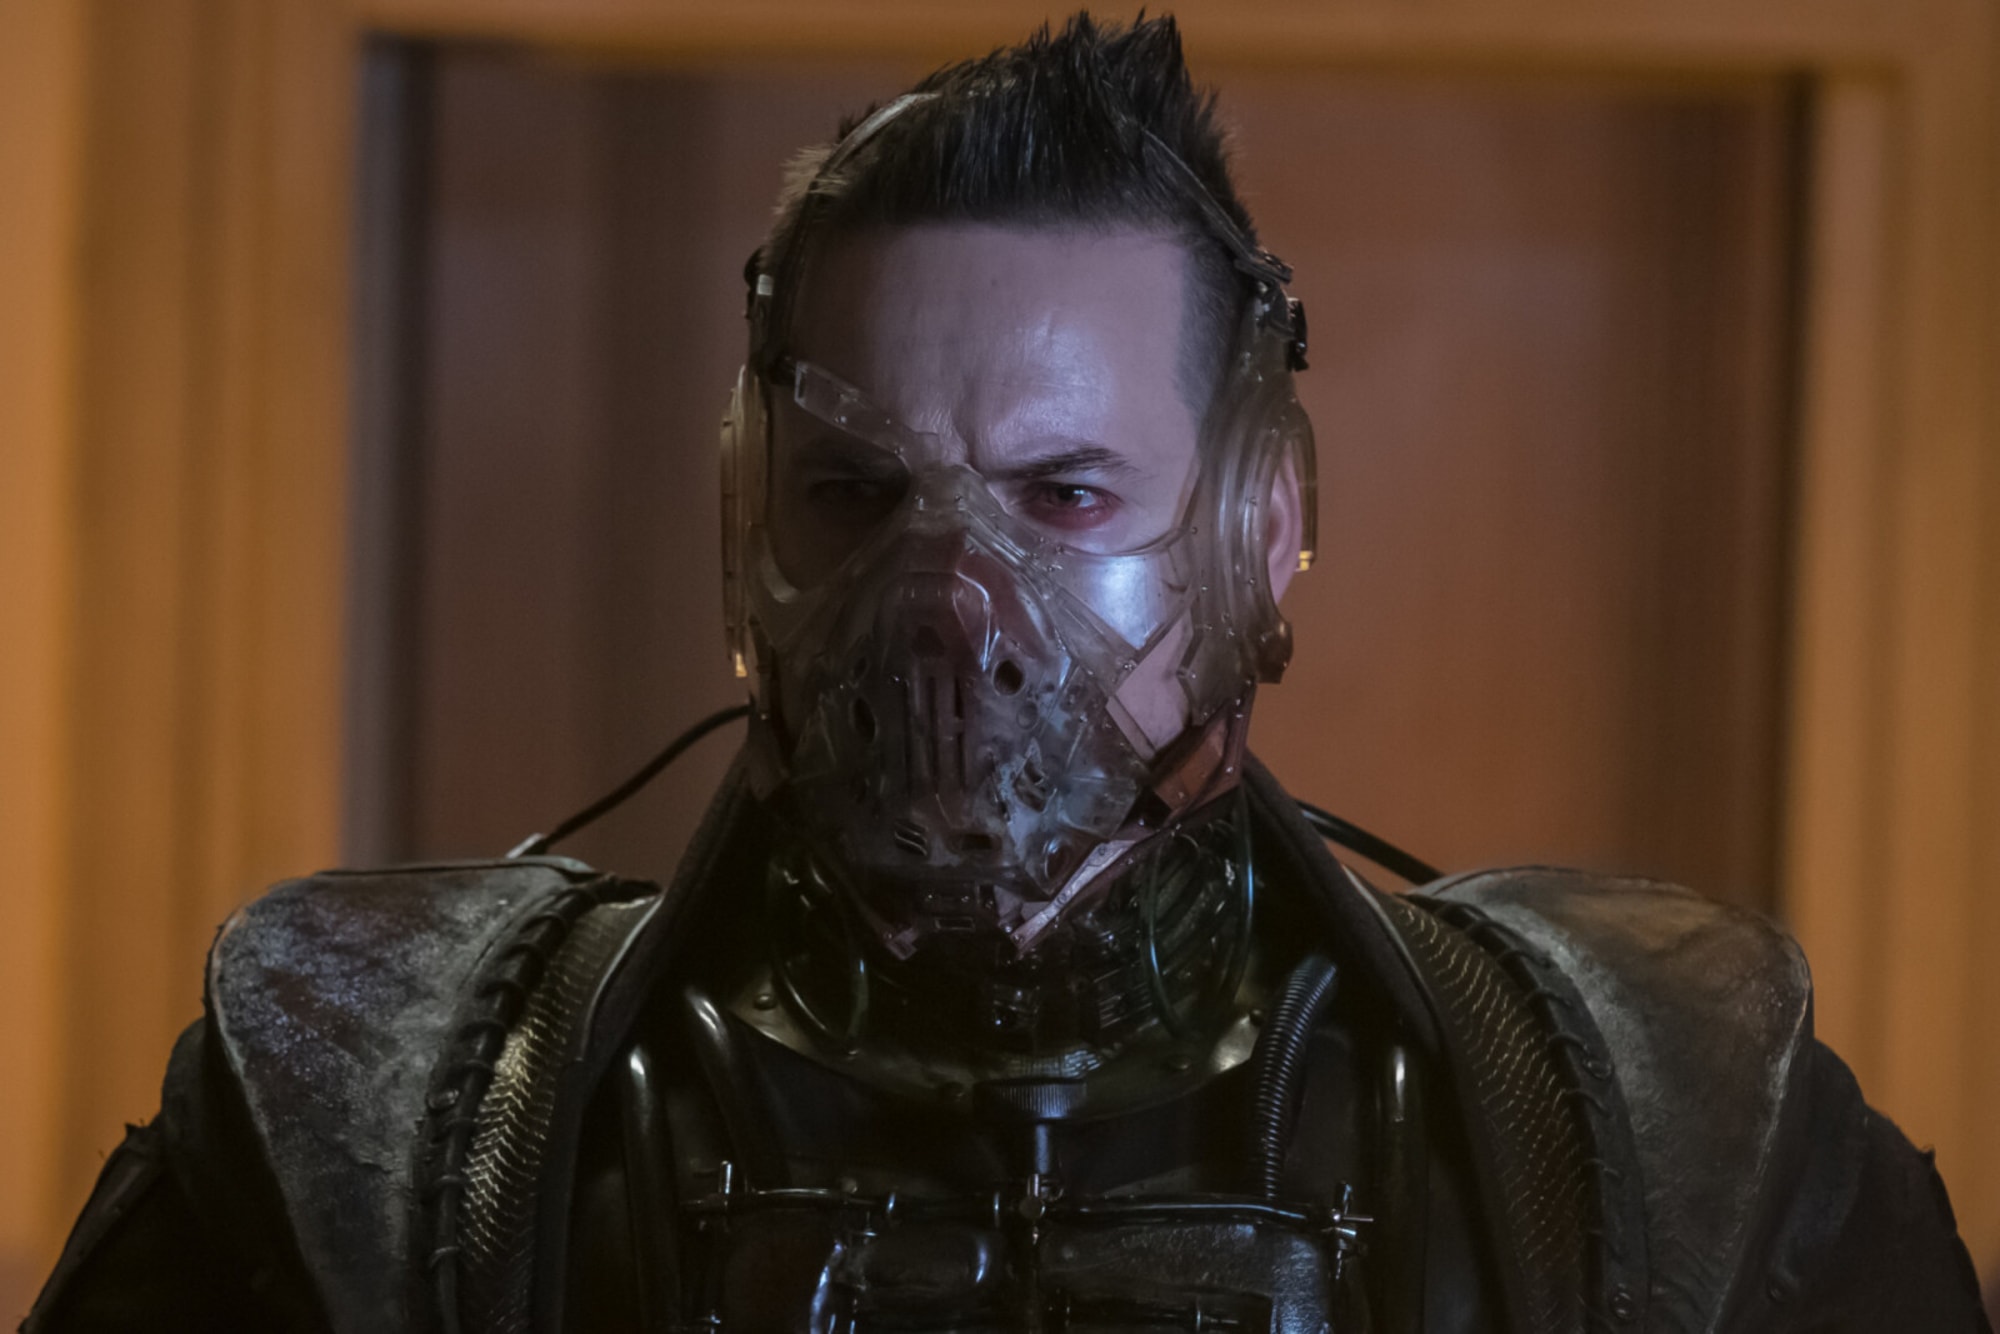 Batman: All 7 Bane actors ranked from worst to best